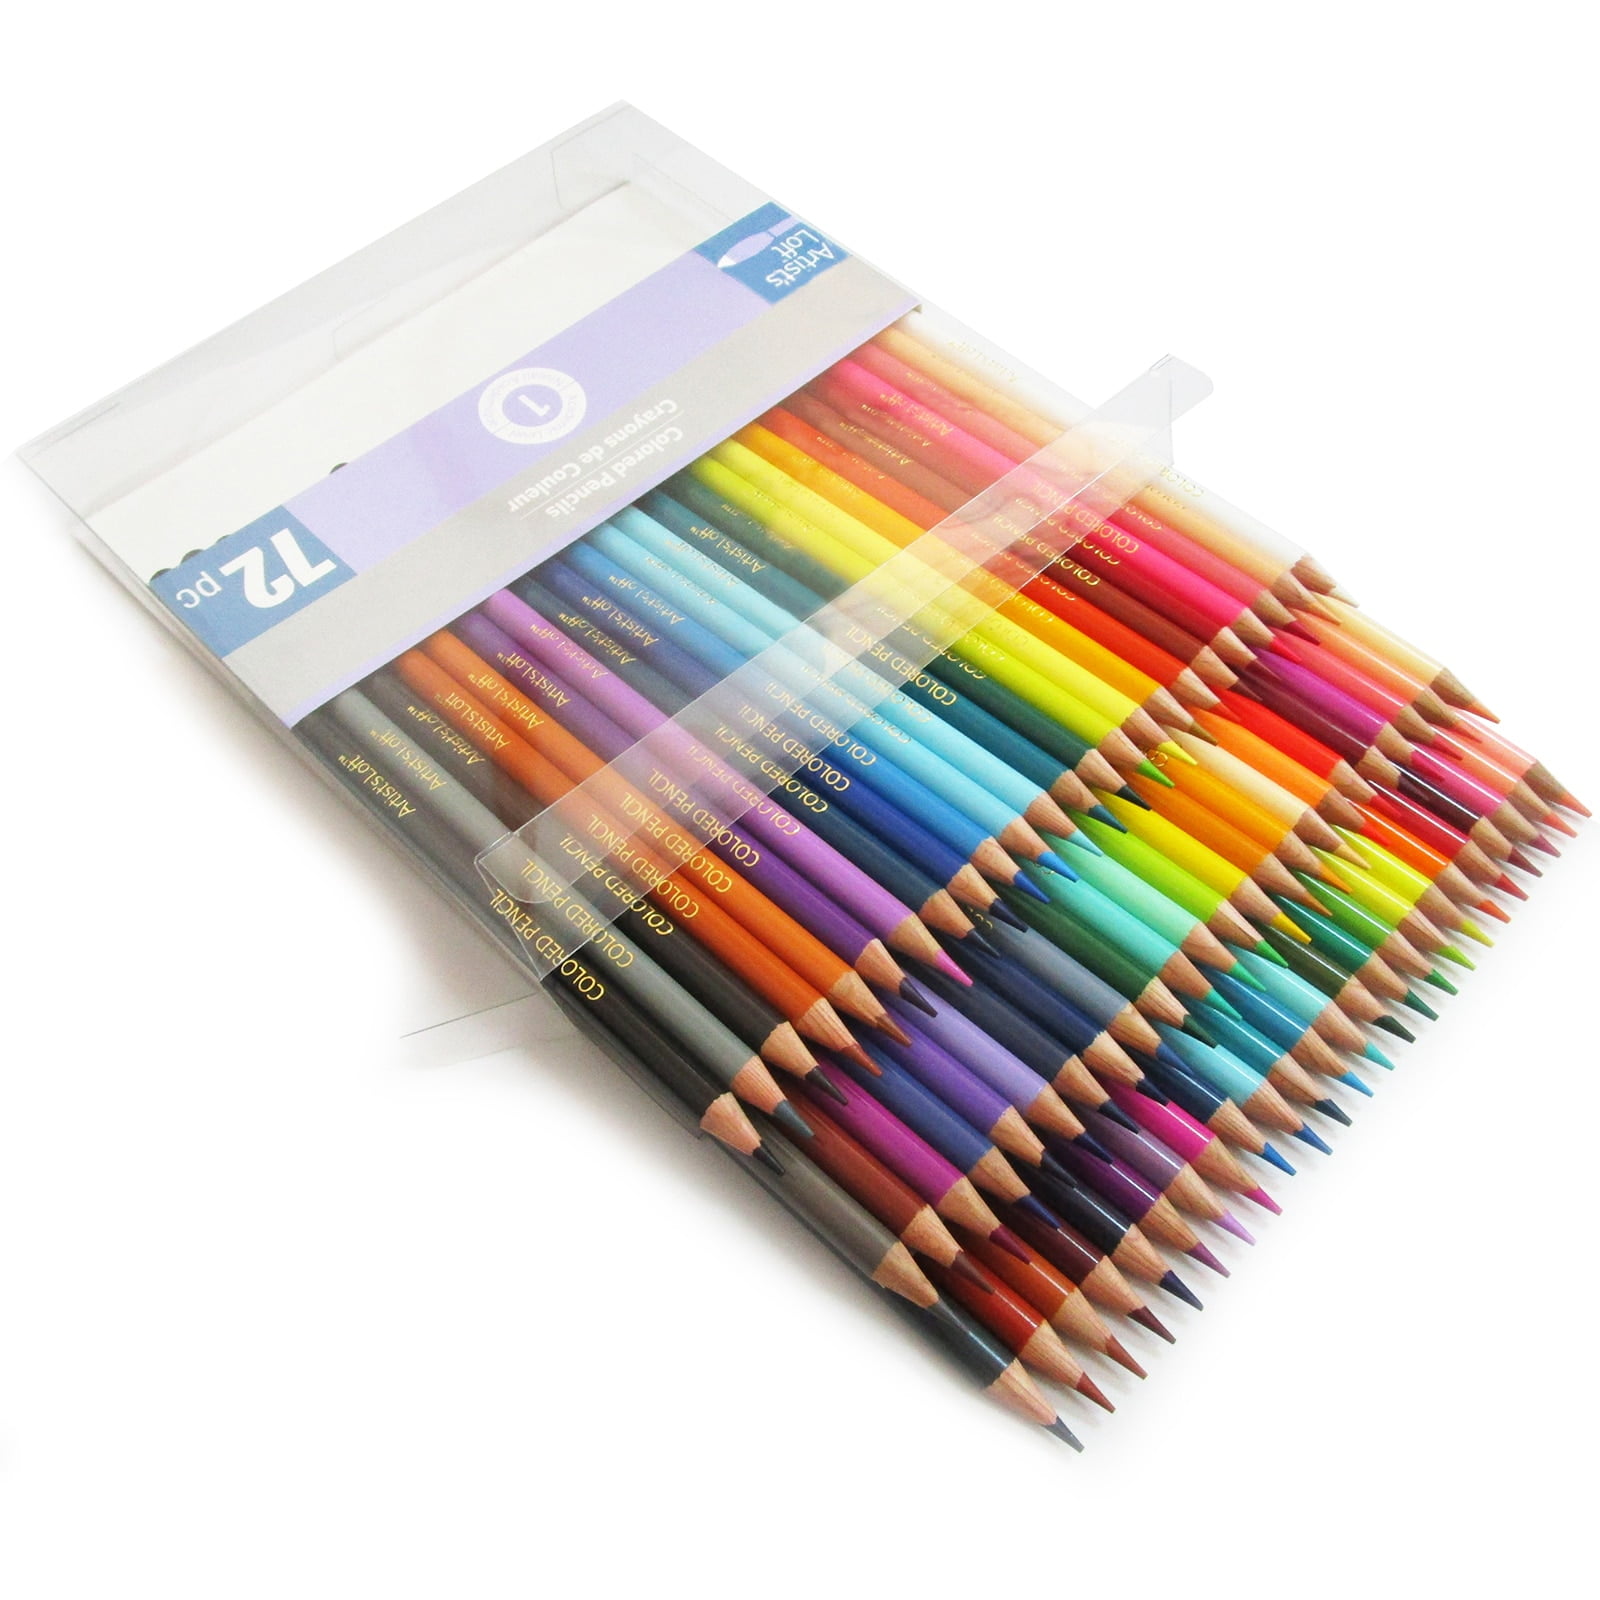 Artist's Loft Colored Pencil set 36 PC Brand New - Fast and Prompt